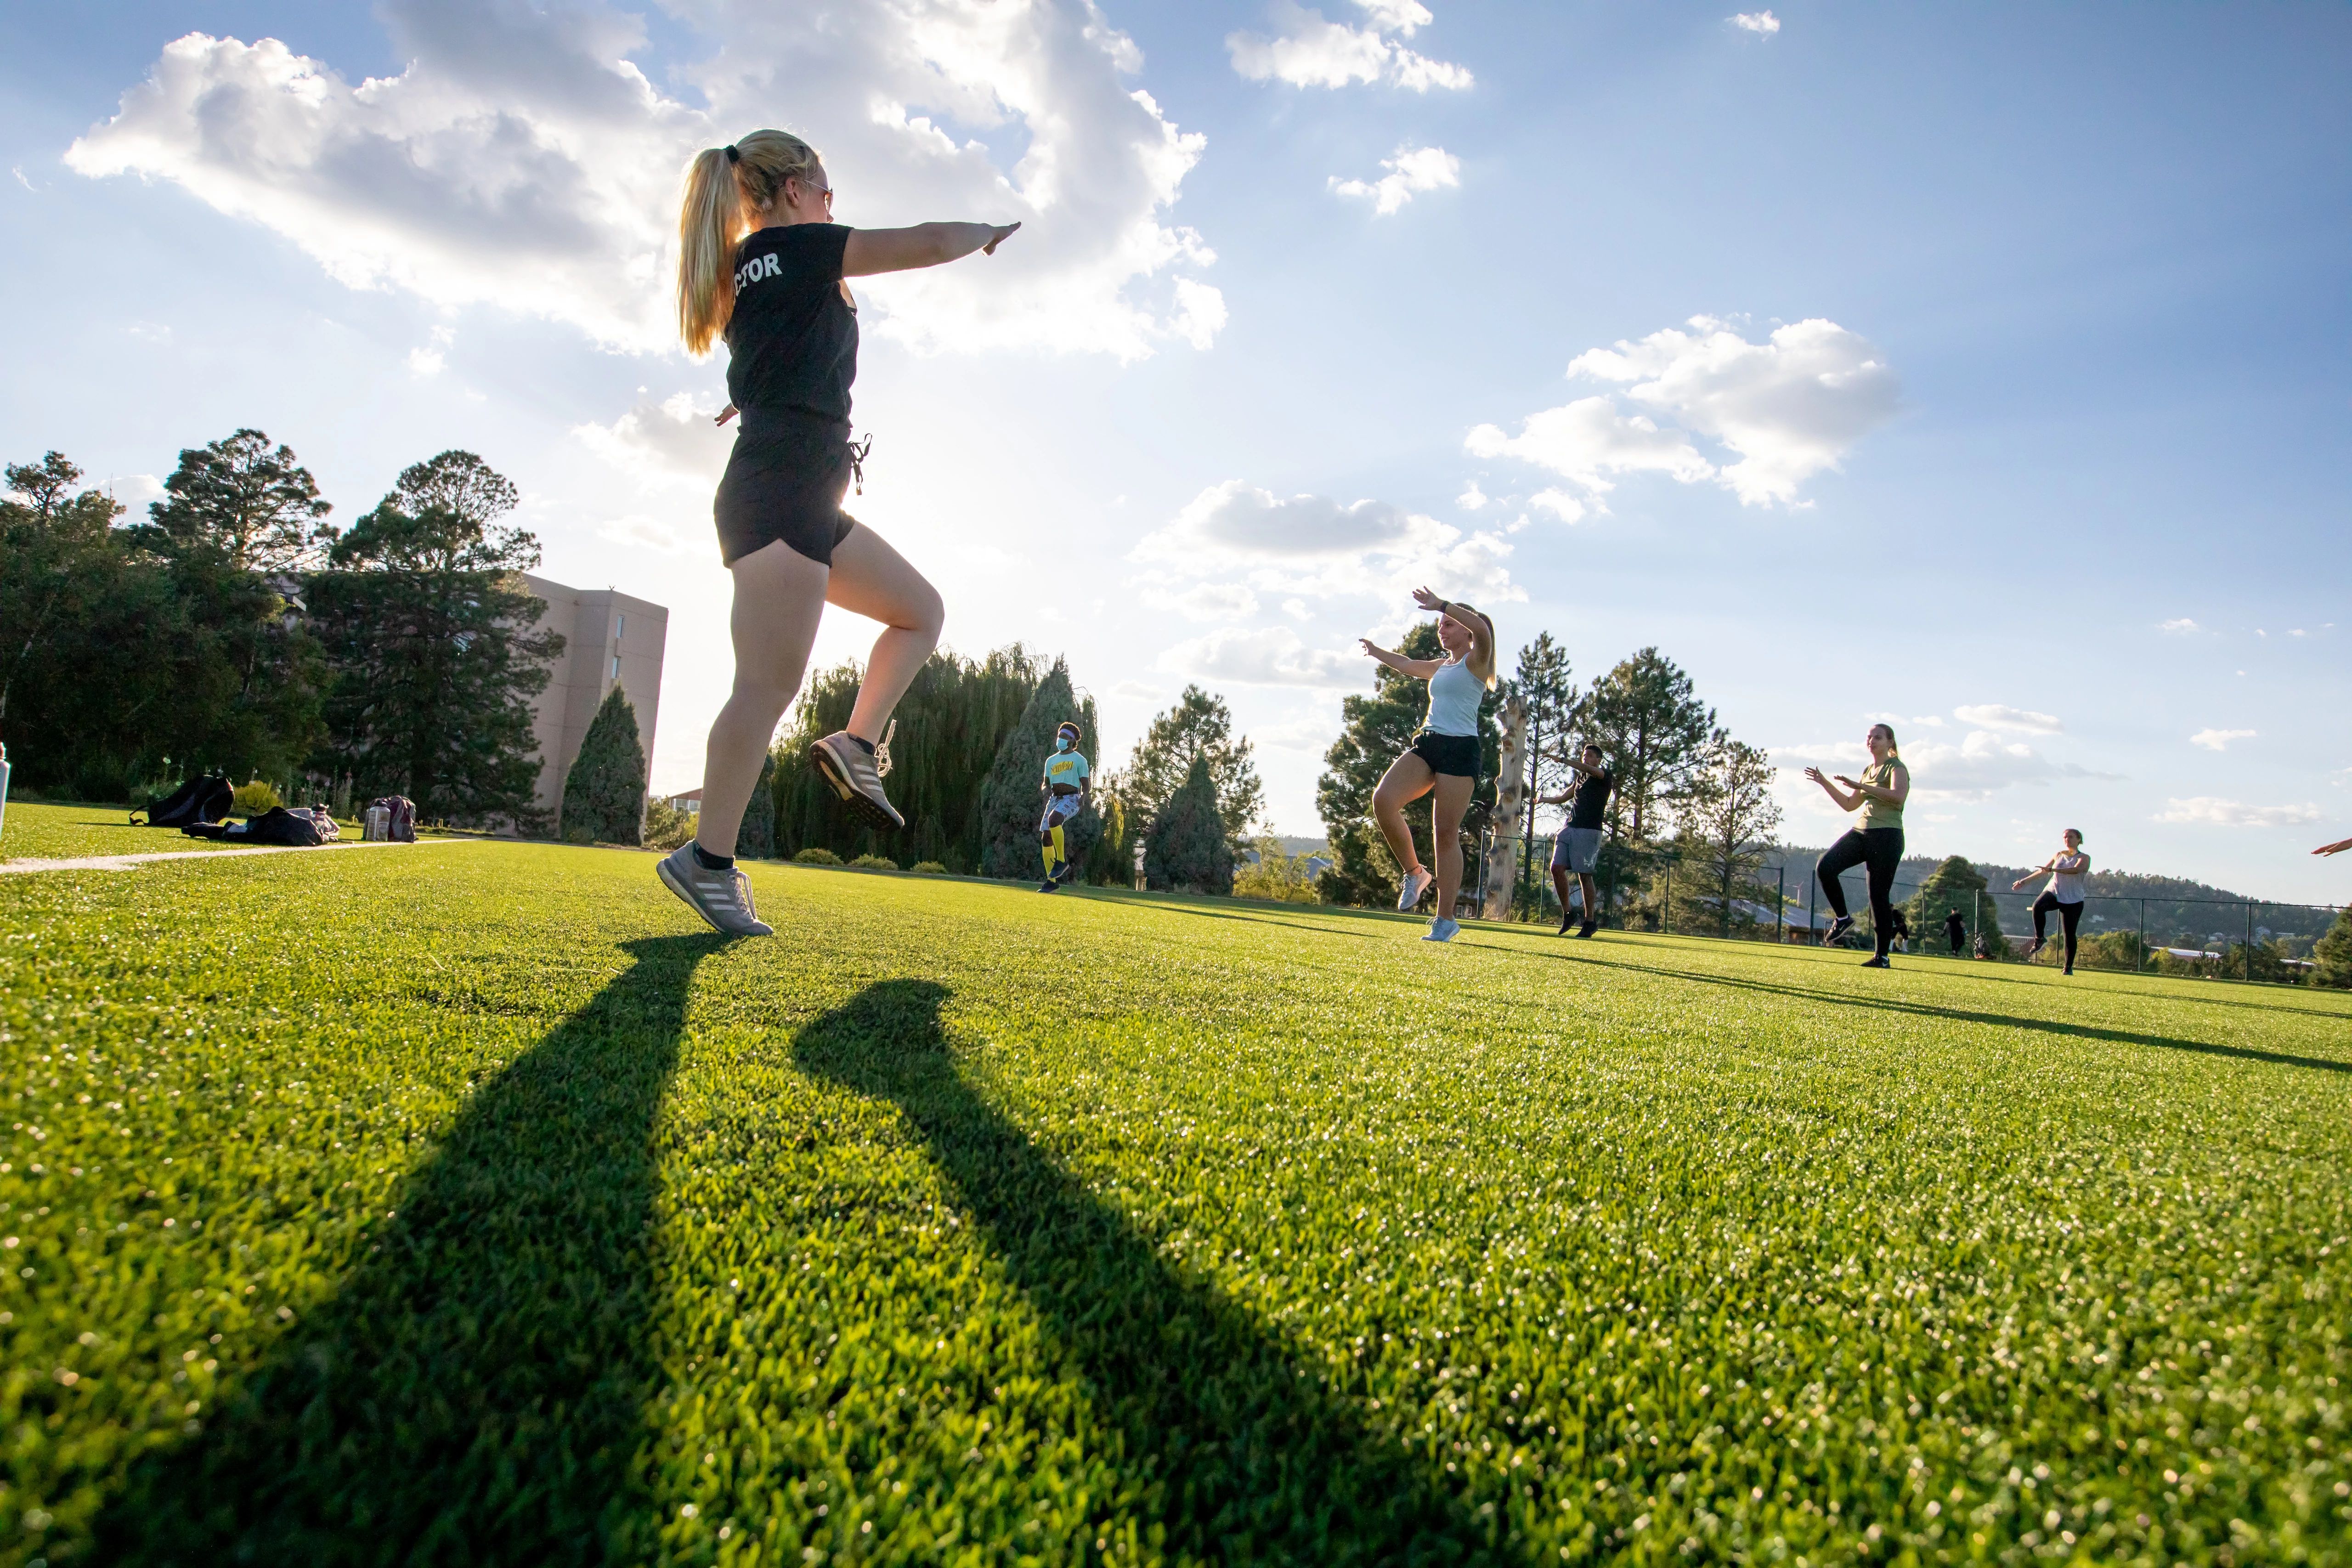 Group fitness class on campus lawn, showing woman leading doing cardio exercises.